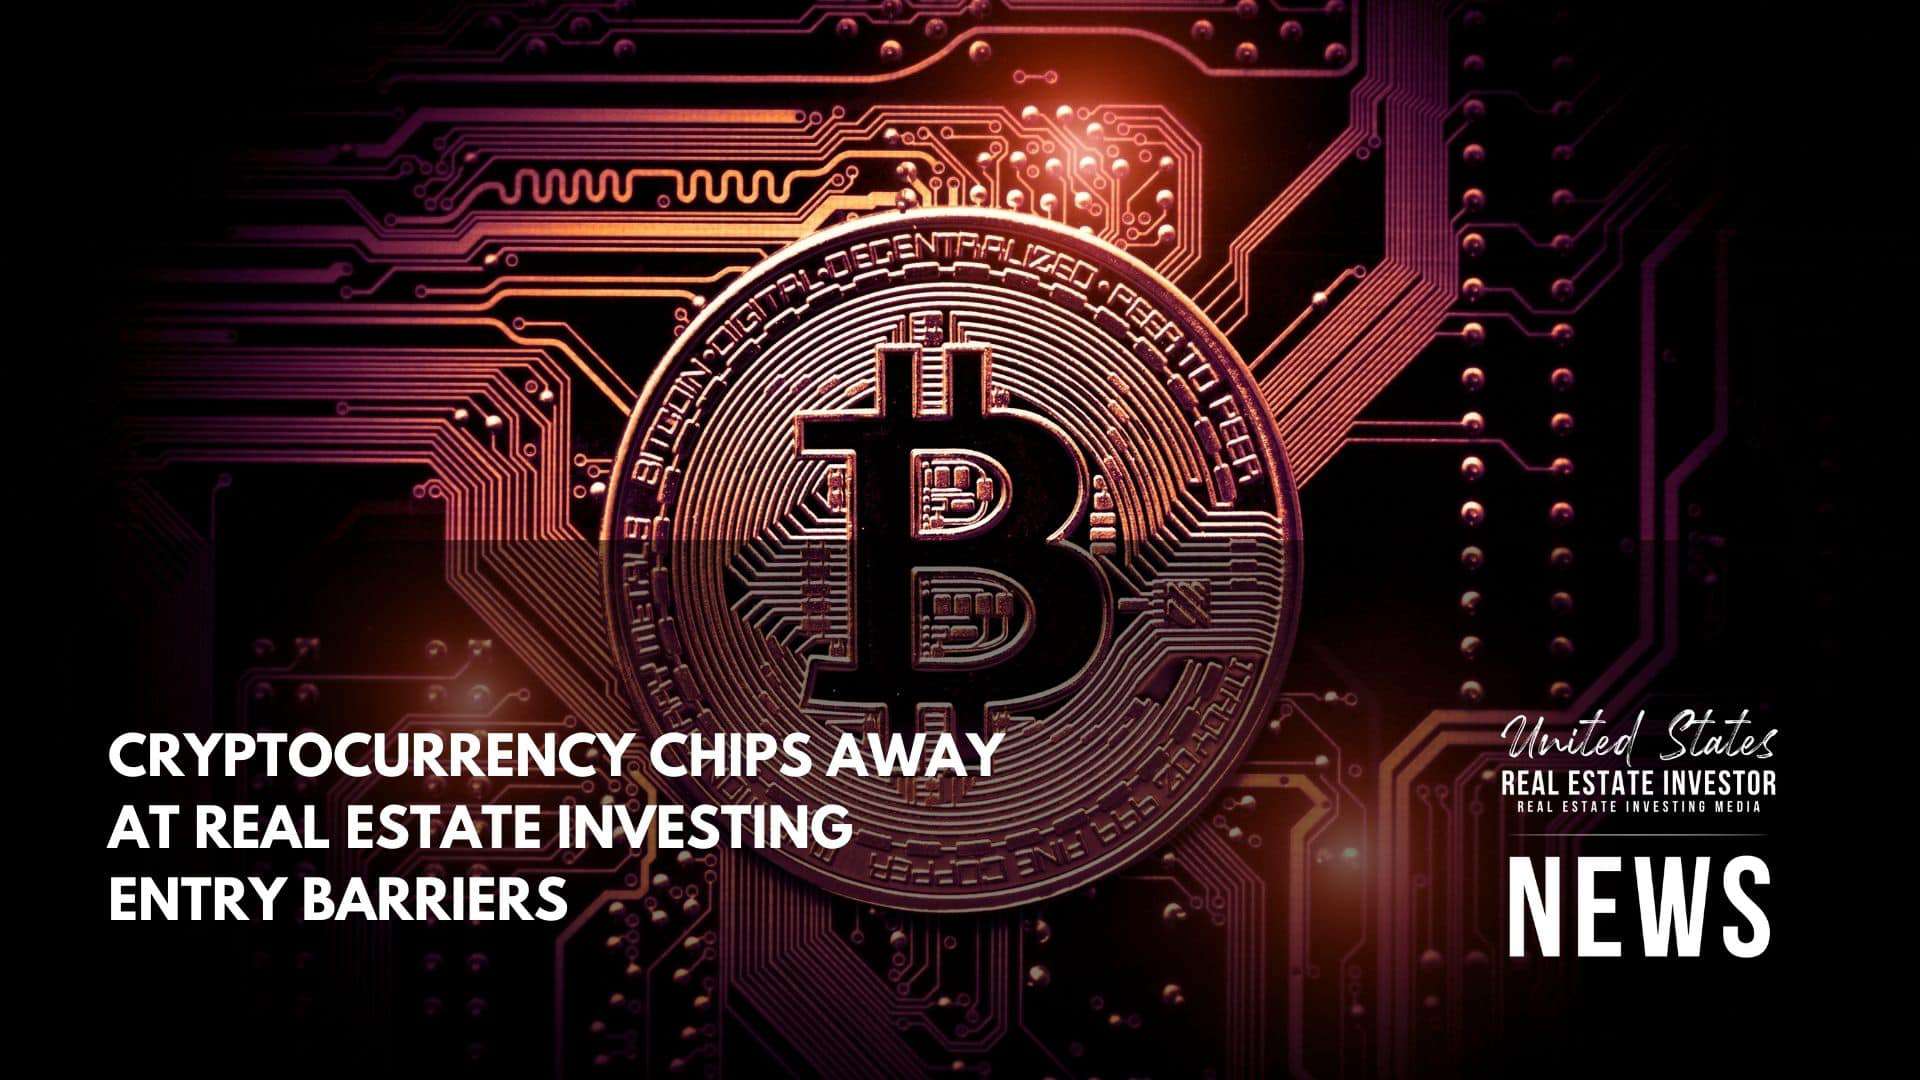 United States Real Estate Investor - Cryptocurrency Chips Away At Real Estate Investing Entry Barriers